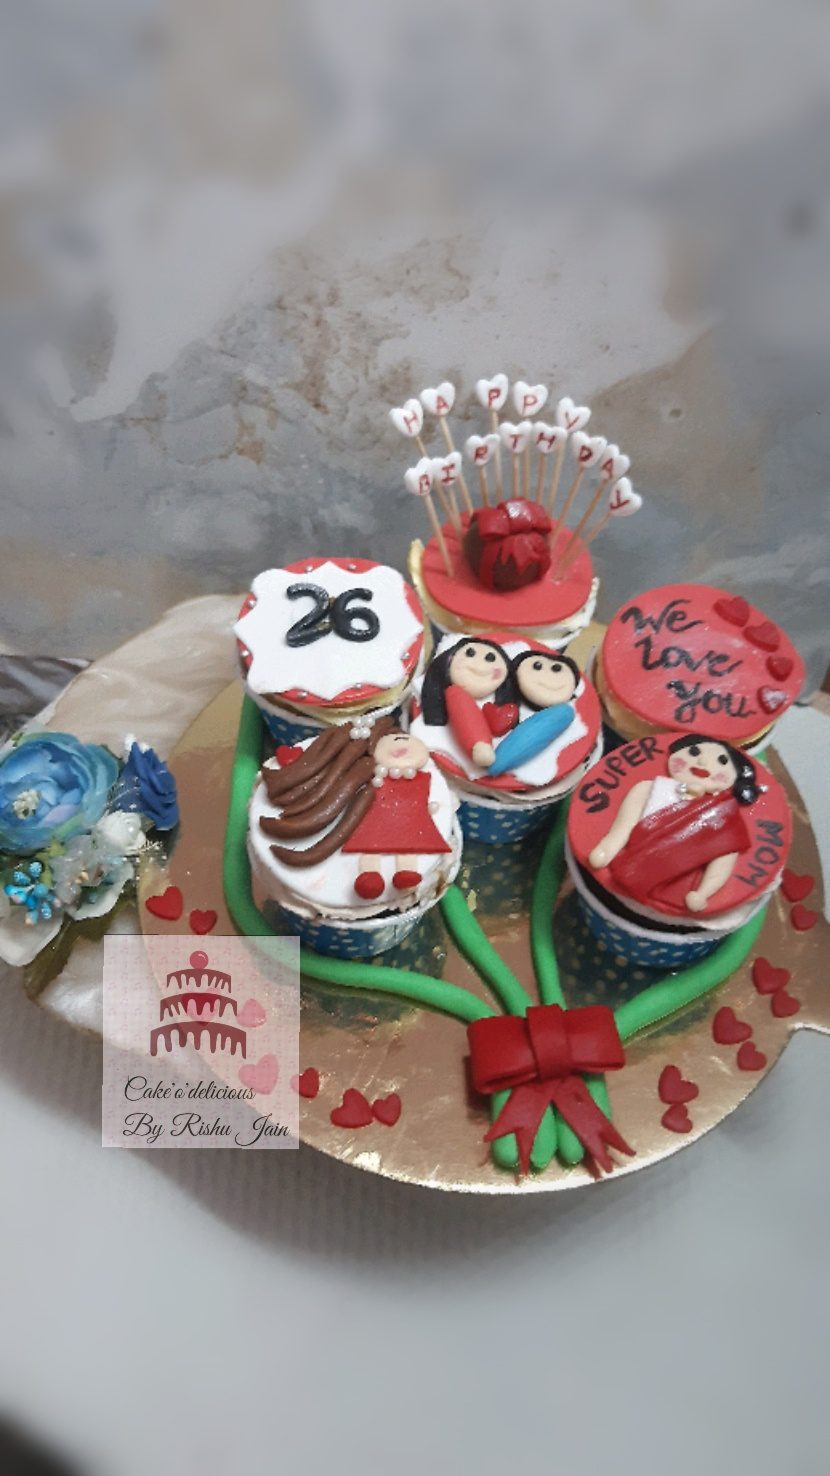 Cup cakes Designs, Images, Price Near Me